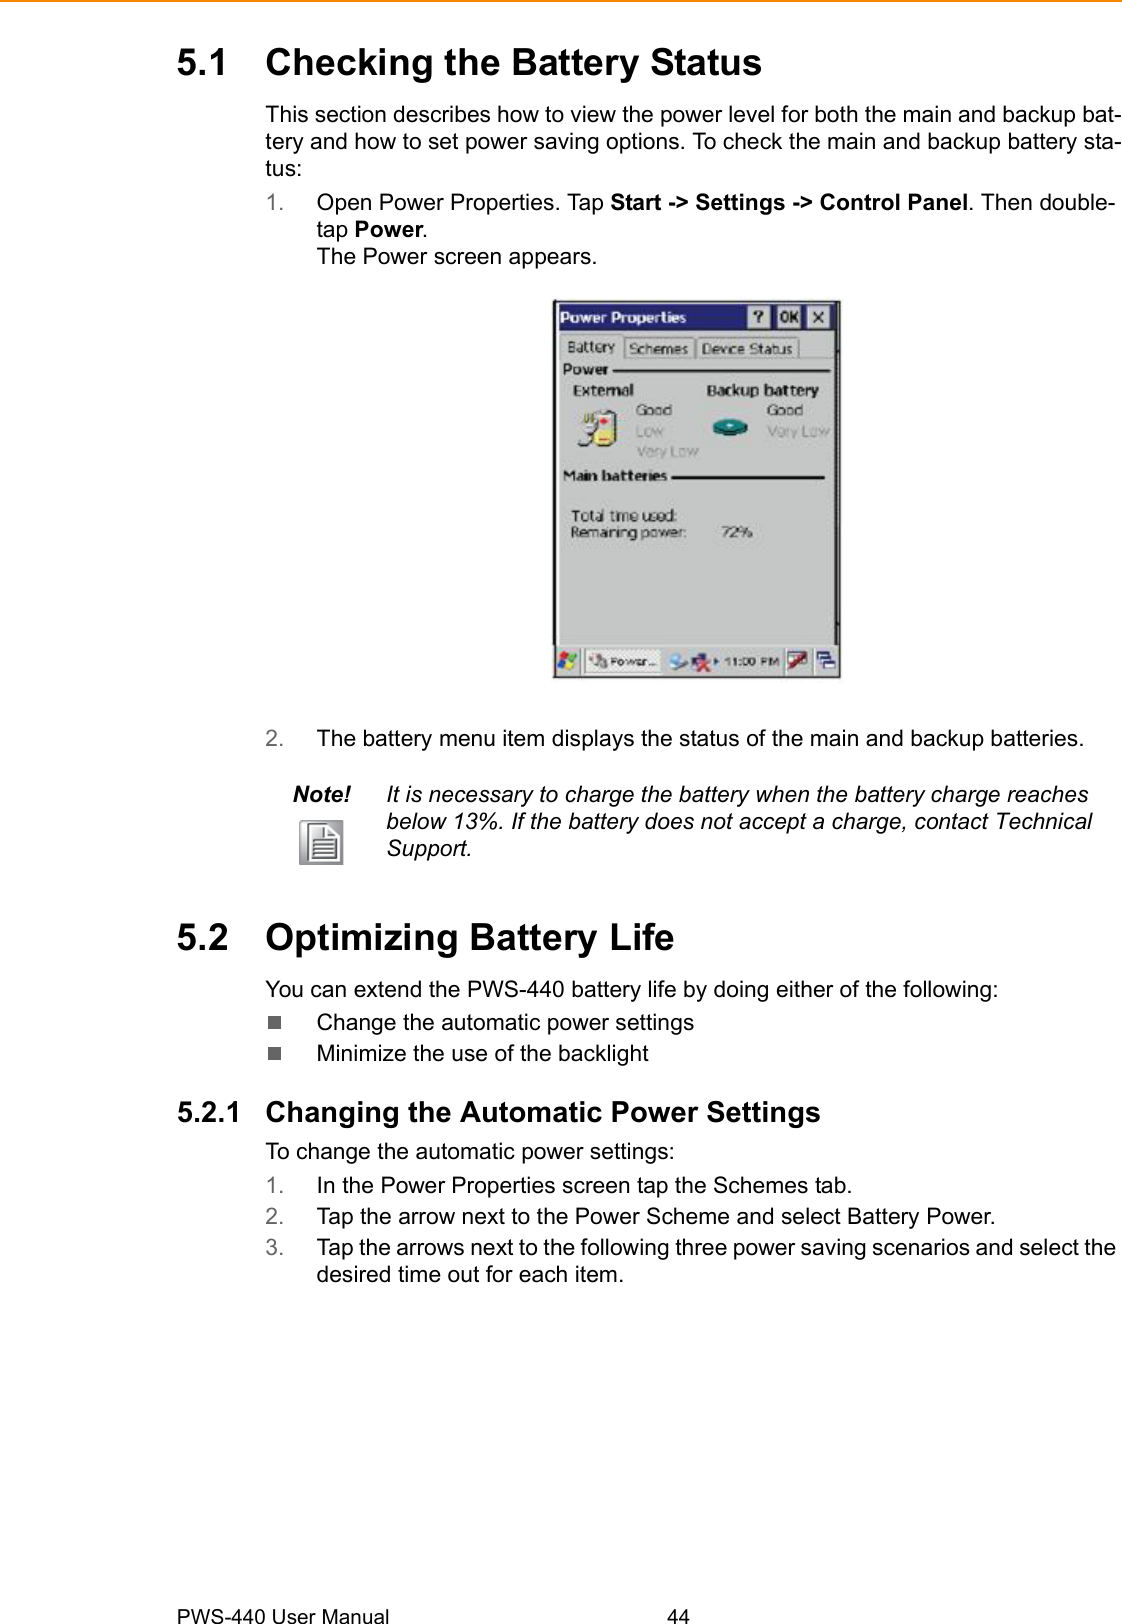 PWS-440 User Manual 445.1 Checking the Battery StatusThis section describes how to view the power level for both the main and backup bat-tery and how to set power saving options. To check the main and backup battery sta-tus:1. Open Power Properties. Tap Start -&gt; Settings -&gt; Control Panel. Then double-tap Power.The Power screen appears.2. The battery menu item displays the status of the main and backup batteries.5.2 Optimizing Battery LifeYou can extend the PWS-440 battery life by doing either of the following:Change the automatic power settingsMinimize the use of the backlight5.2.1 Changing the Automatic Power SettingsTo change the automatic power settings:1. In the Power Properties screen tap the Schemes tab.2. Tap the arrow next to the Power Scheme and select Battery Power.3. Tap the arrows next to the following three power saving scenarios and select the desired time out for each item.Note! It is necessary to charge the battery when the battery charge reaches below 13%. If the battery does not accept a charge, contact Technical Support.